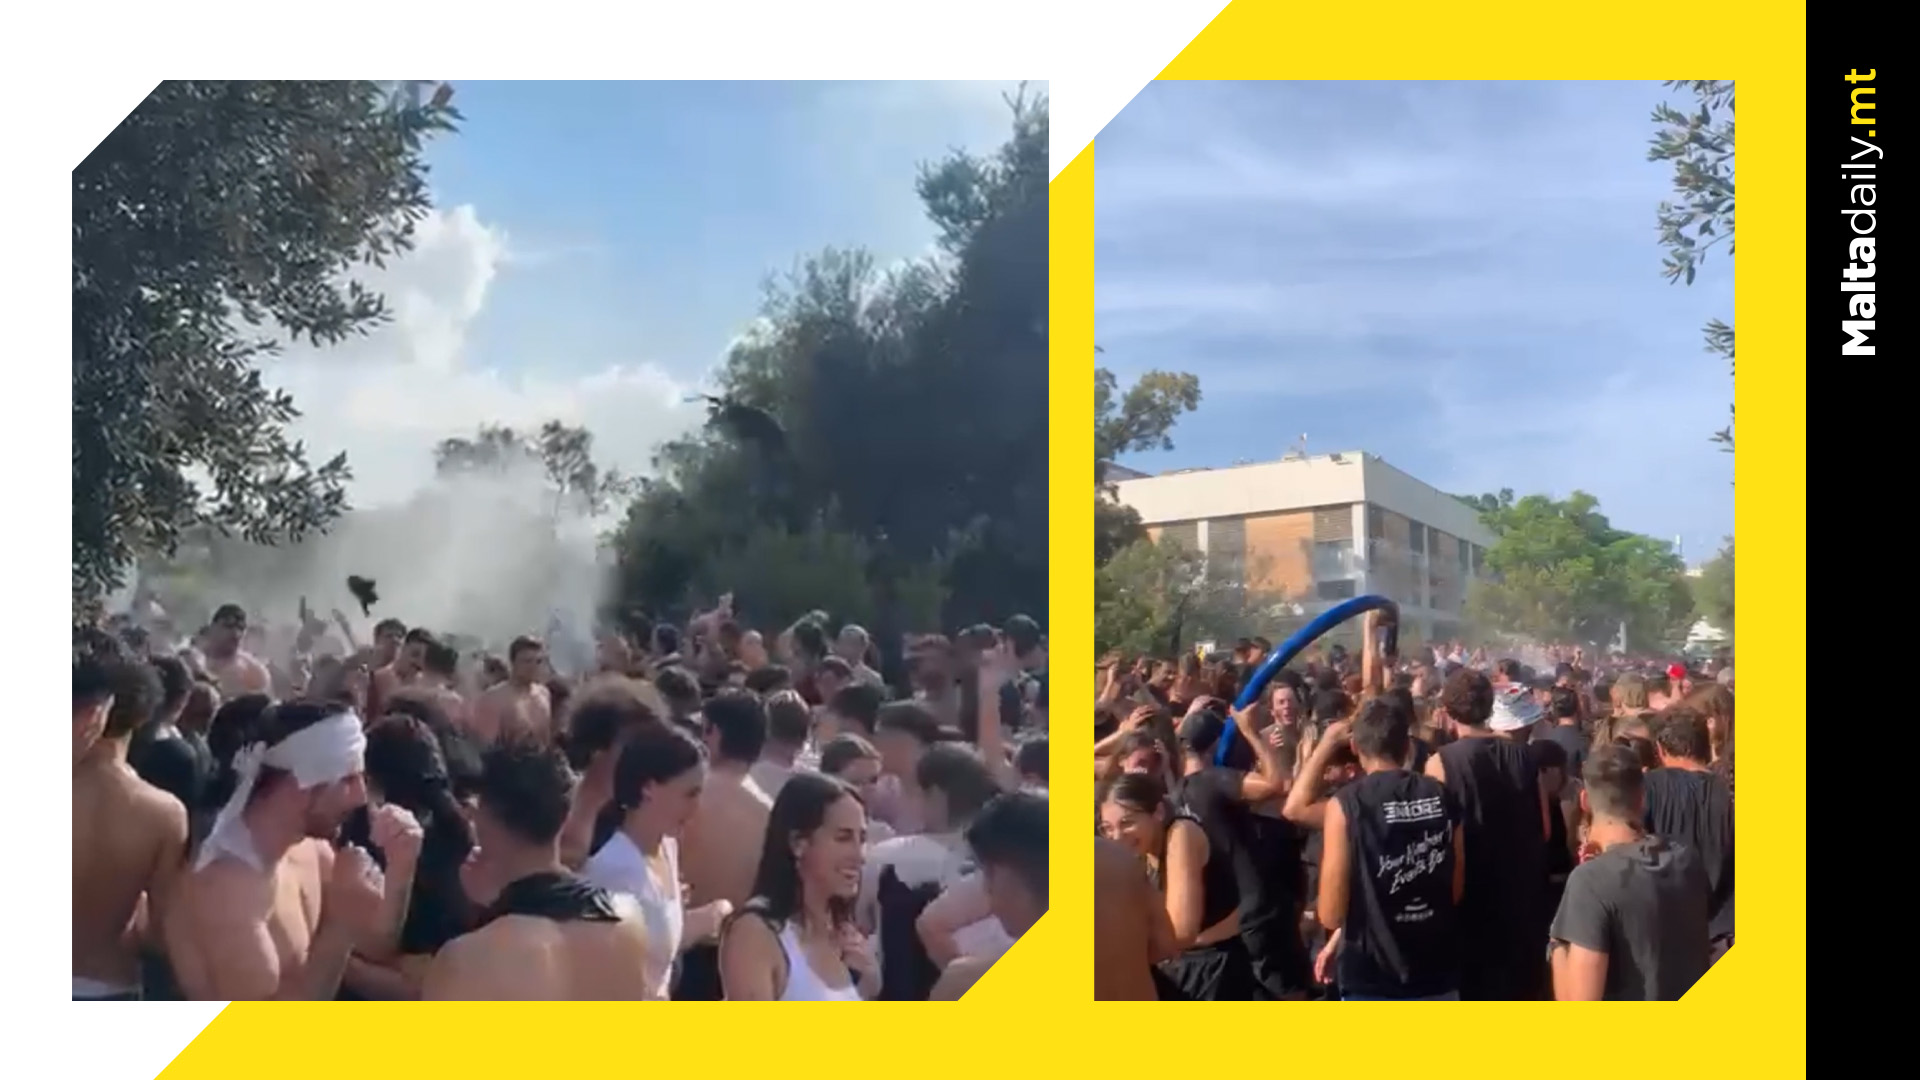 Chaos at University for Yearly ELSA vs SACES Water Fight